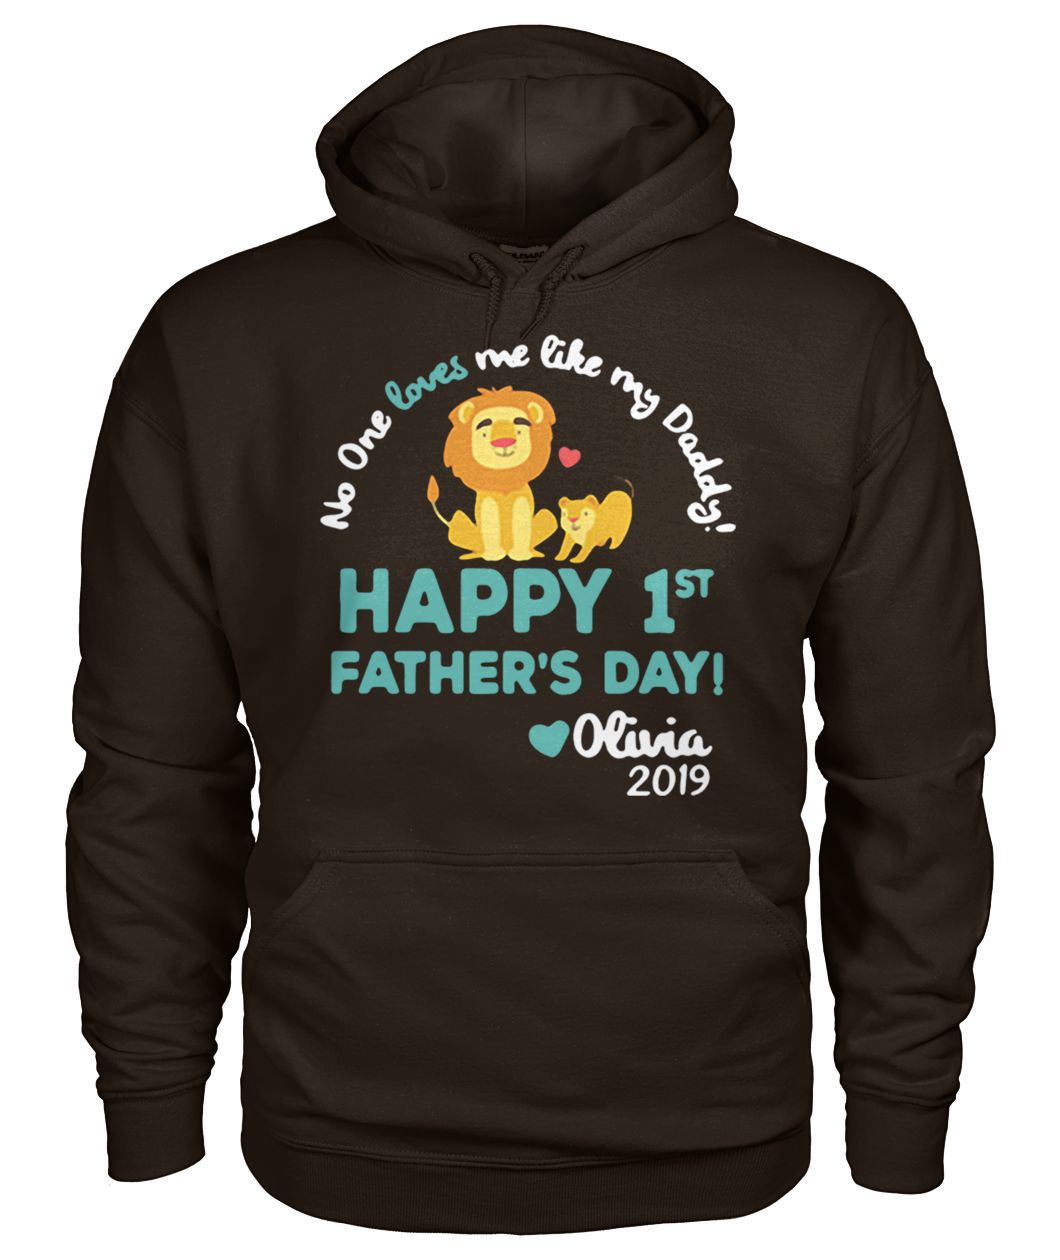 The lion king no one loves me like my daddy happy 1st father's day olivia 2019 gildan hoodie